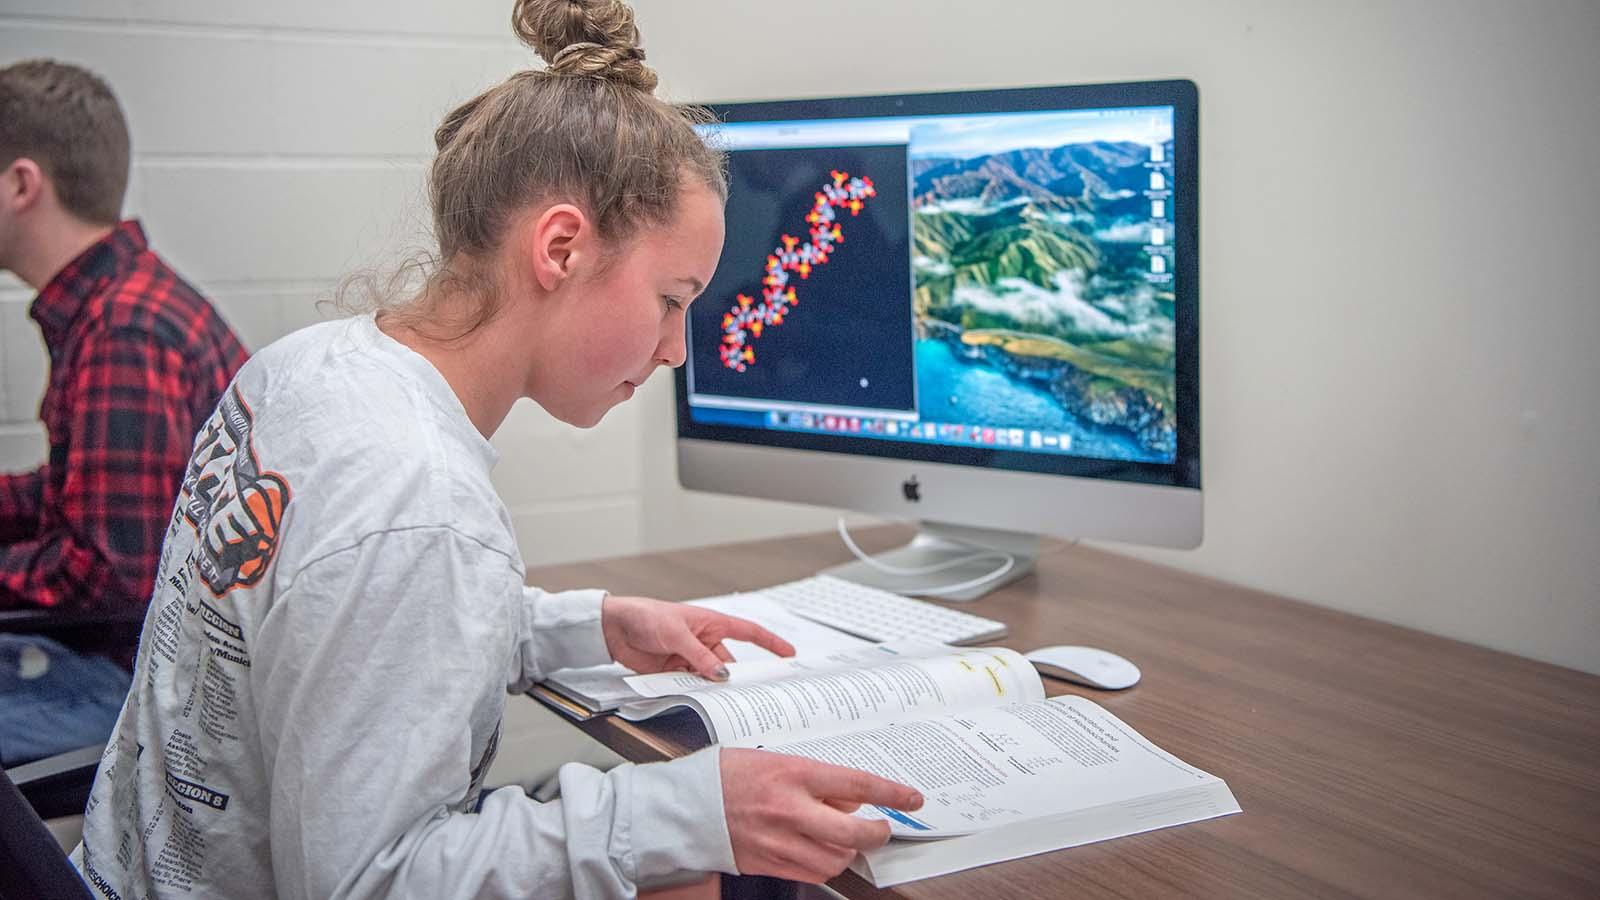 Female student looking at textbook with computer in front of her with DNA strand on the screen.